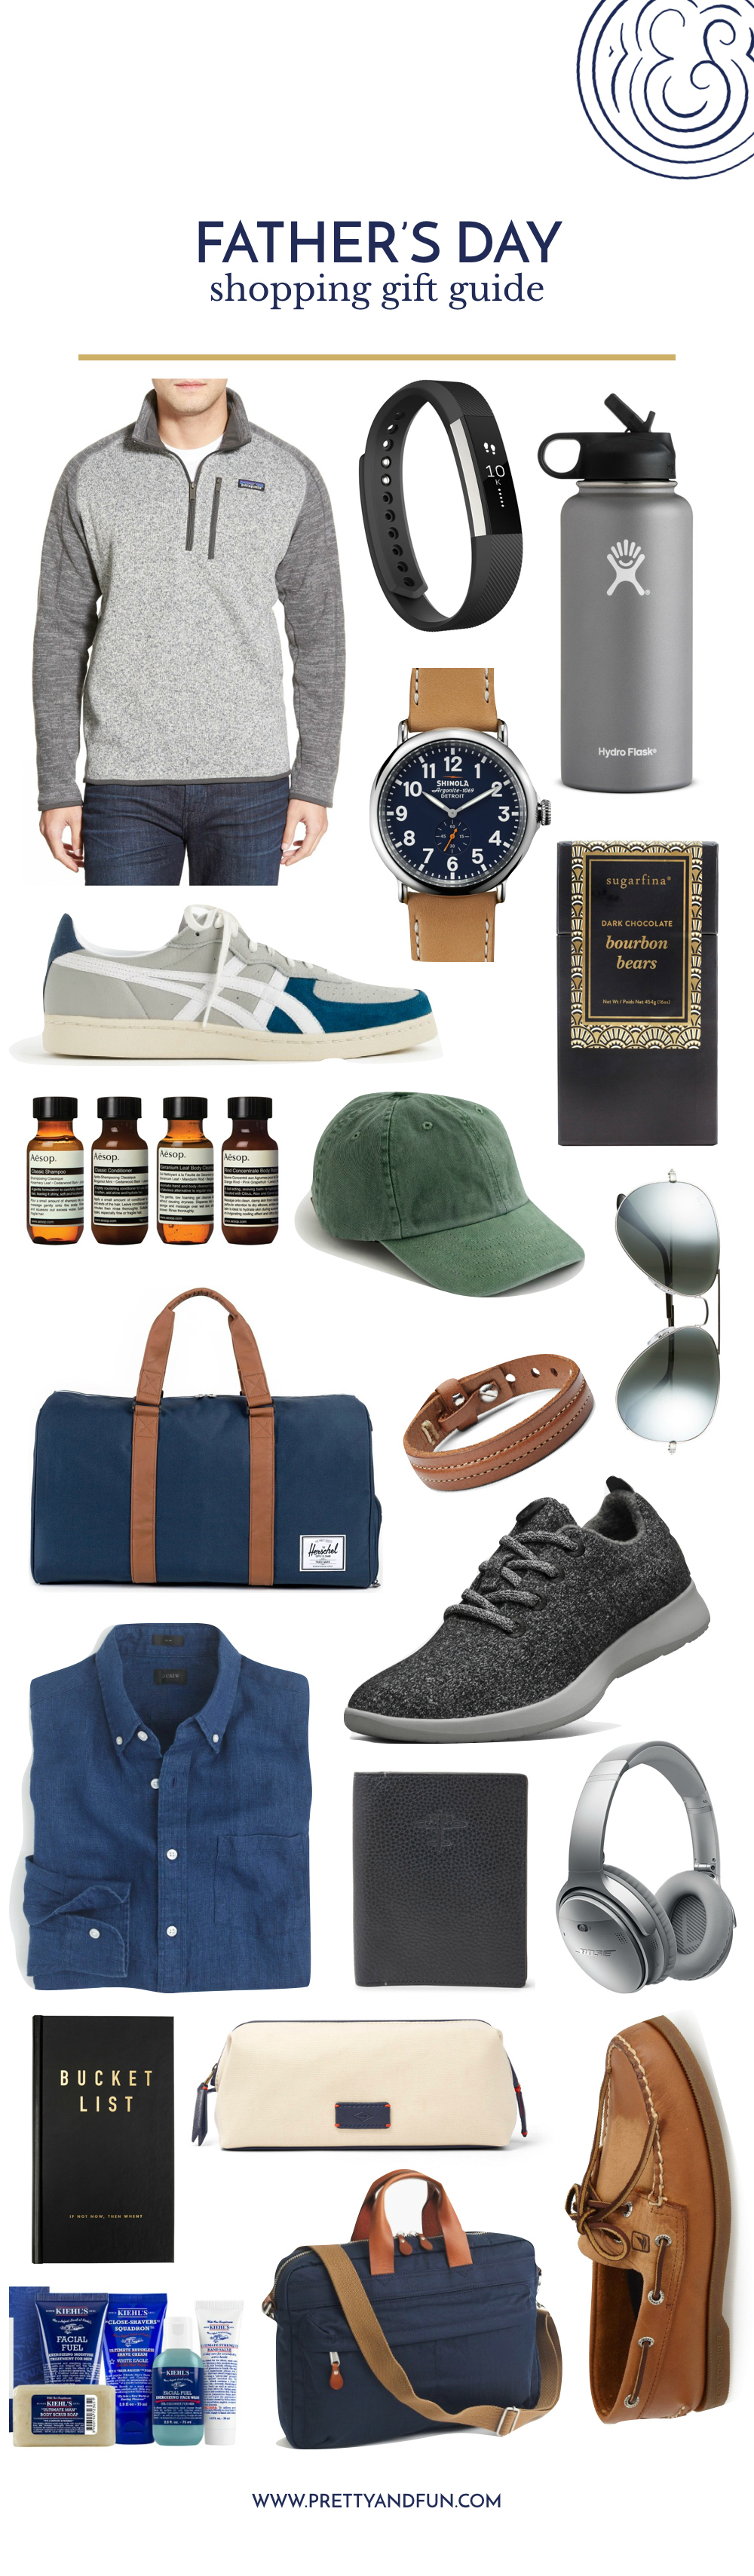 The Best Father's Day Gift Ideas that Dad Will Love.